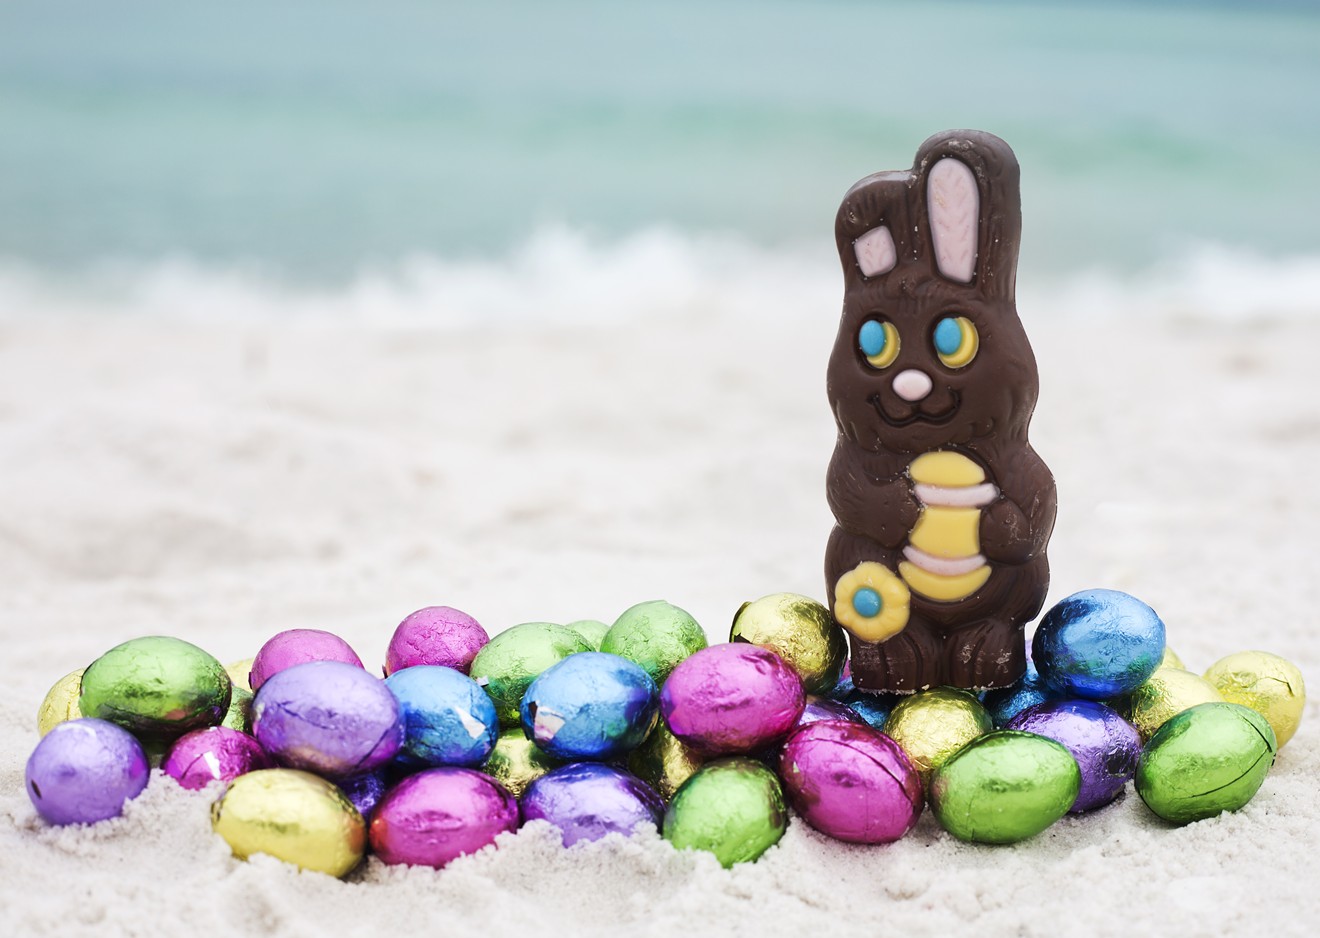 A wacky slime station and mermaid visit are part of B Ocean Resort's Easter activities.